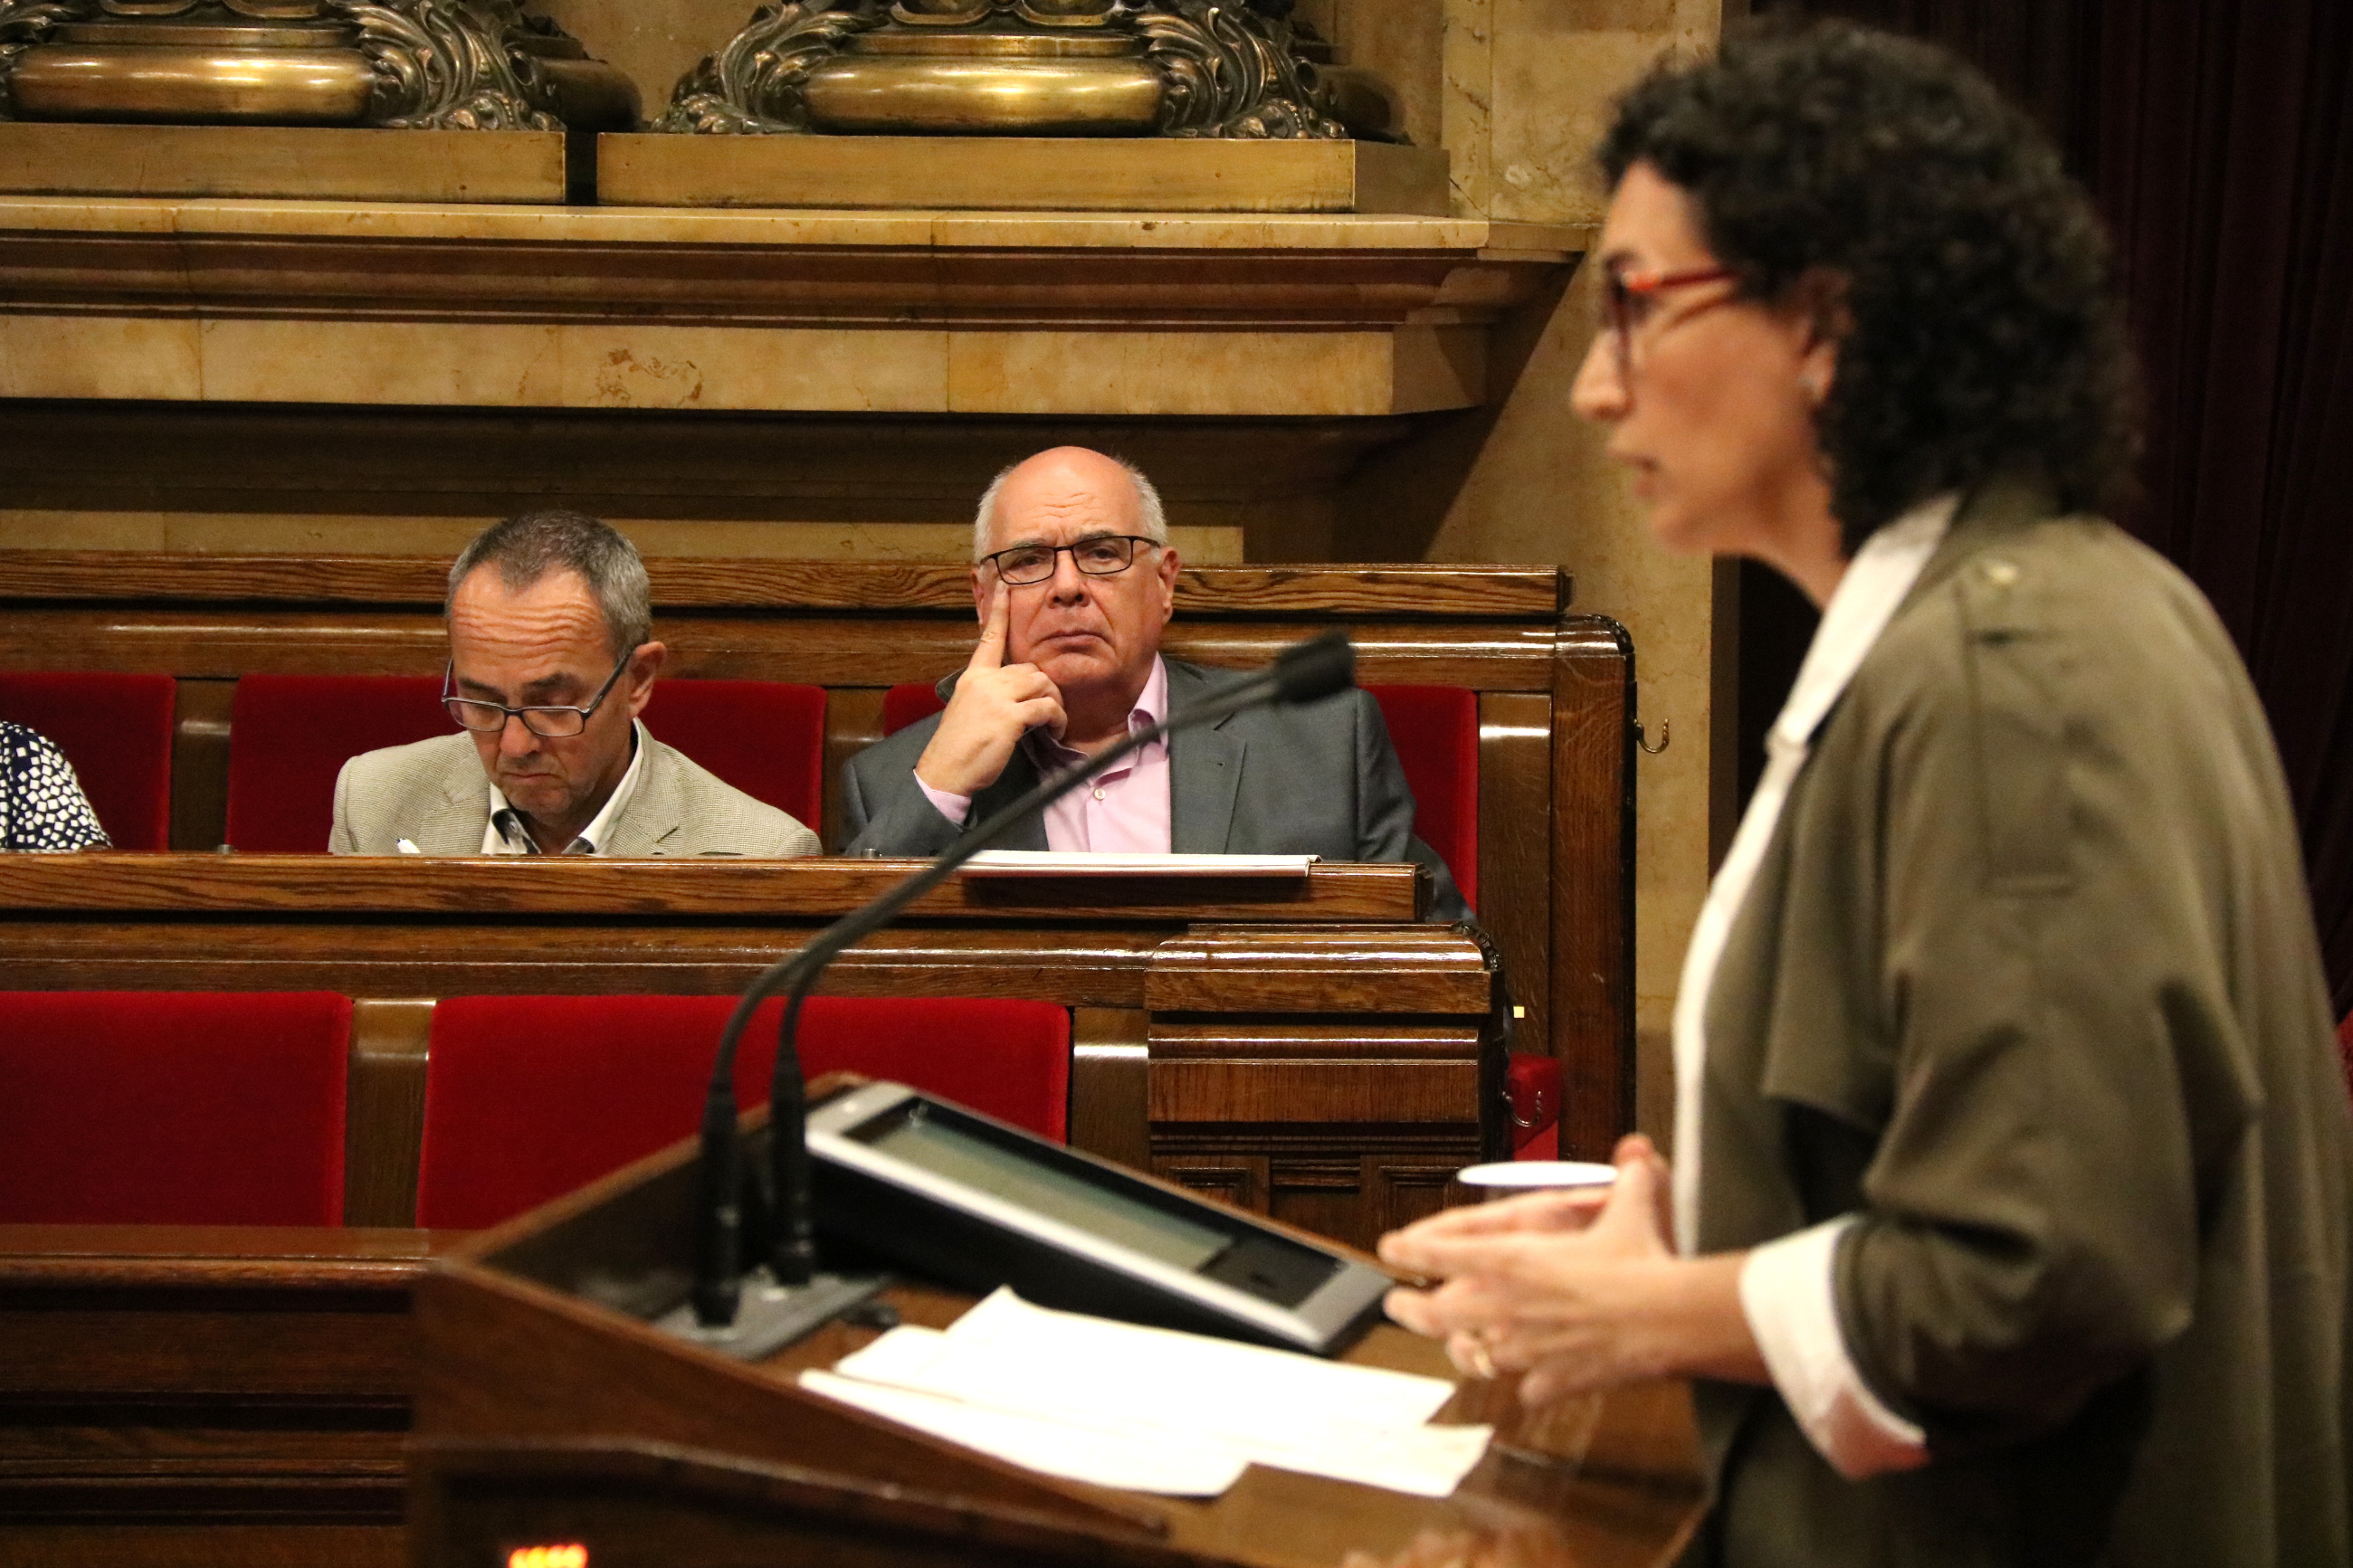 'Junts Pel Sí' spokeswoman, Marta Rovira, on the foreground and 'Catalunya Sí que es Pot' MPs sitting on the background (by ACN)